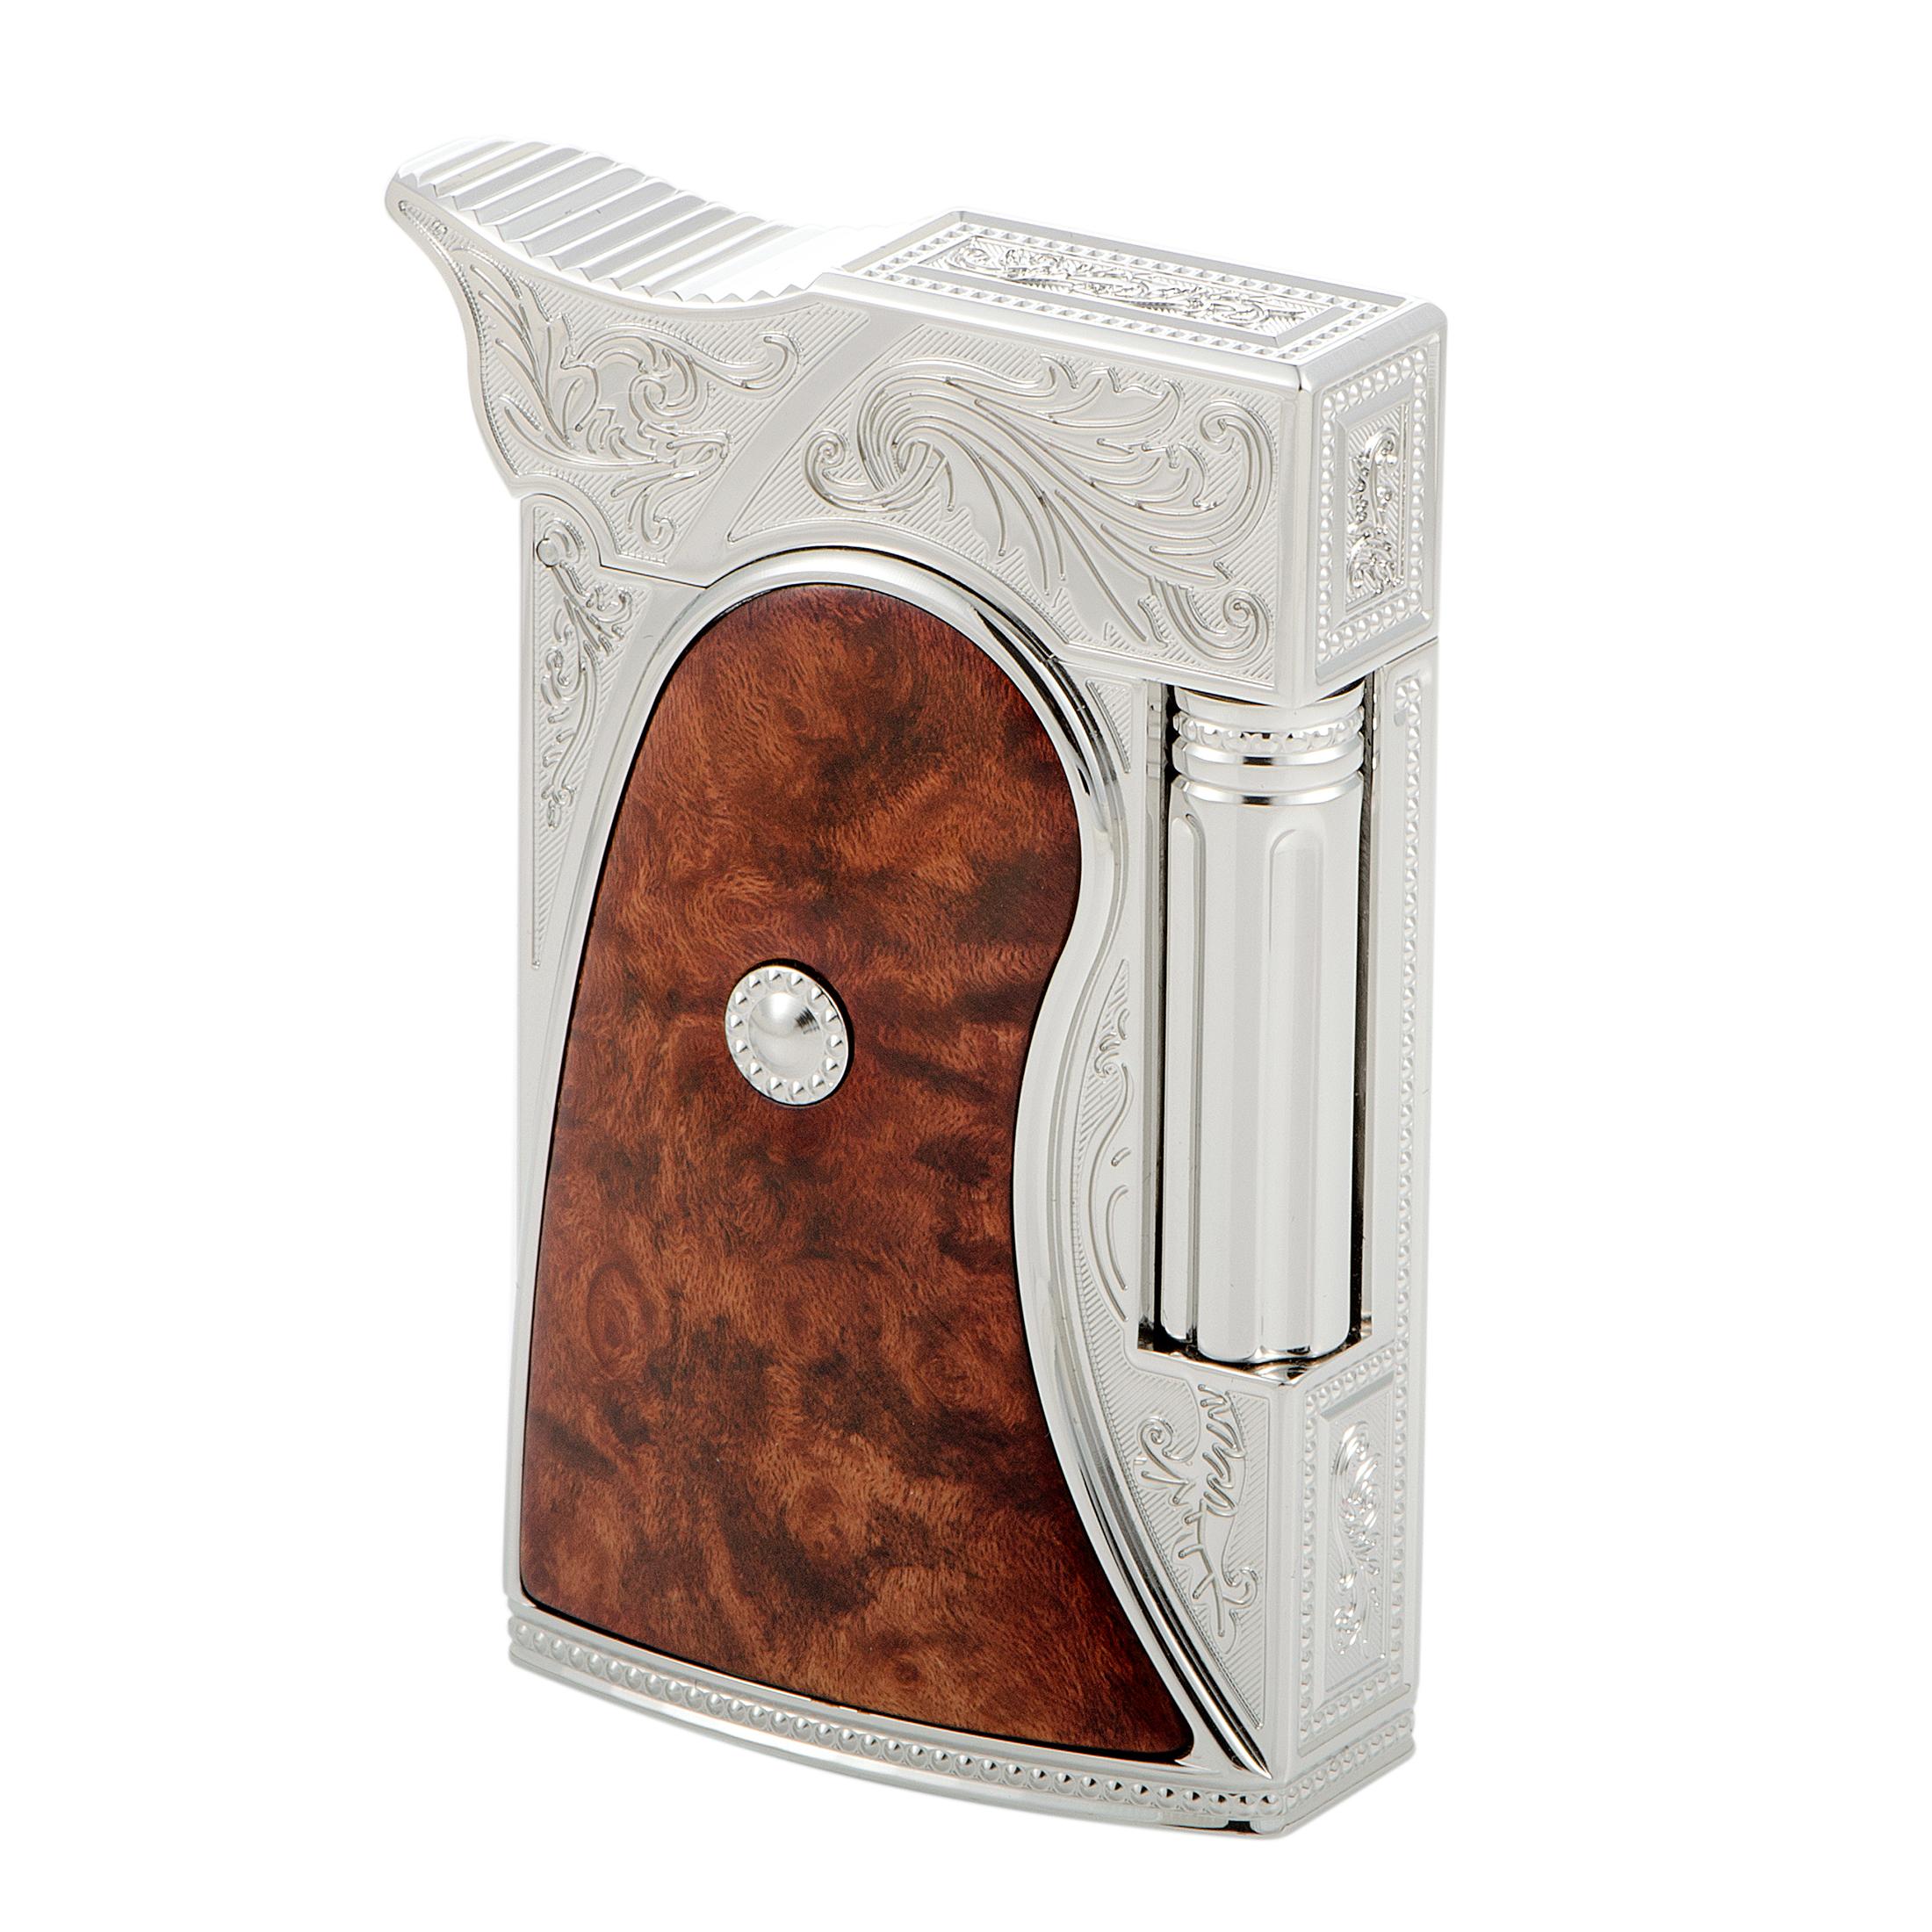 Inspired by the intriguing, adventurous Wild West era, this extraordinarily designed S.T. Dupont lighter boasts expertly crafted intricate décor reminiscent of antique guns. The lighter boasts palladium finish and beautiful heather wood, and it